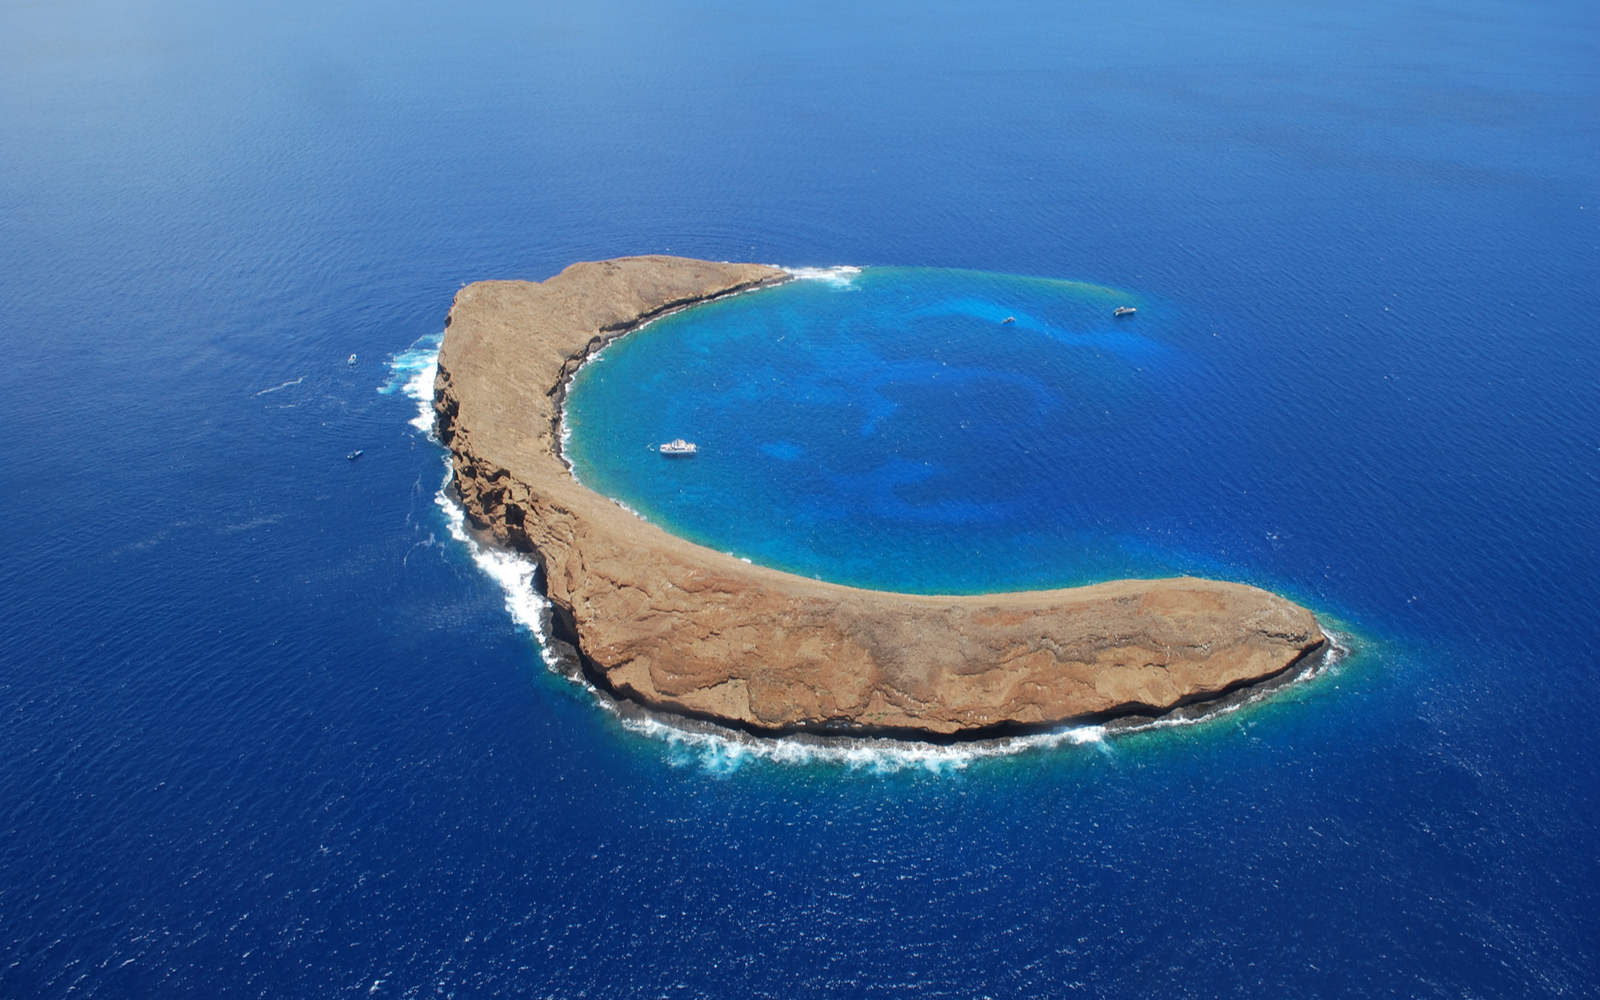 Molokini crater, one of the best Hawaiian snorkeling spots, as seen from above